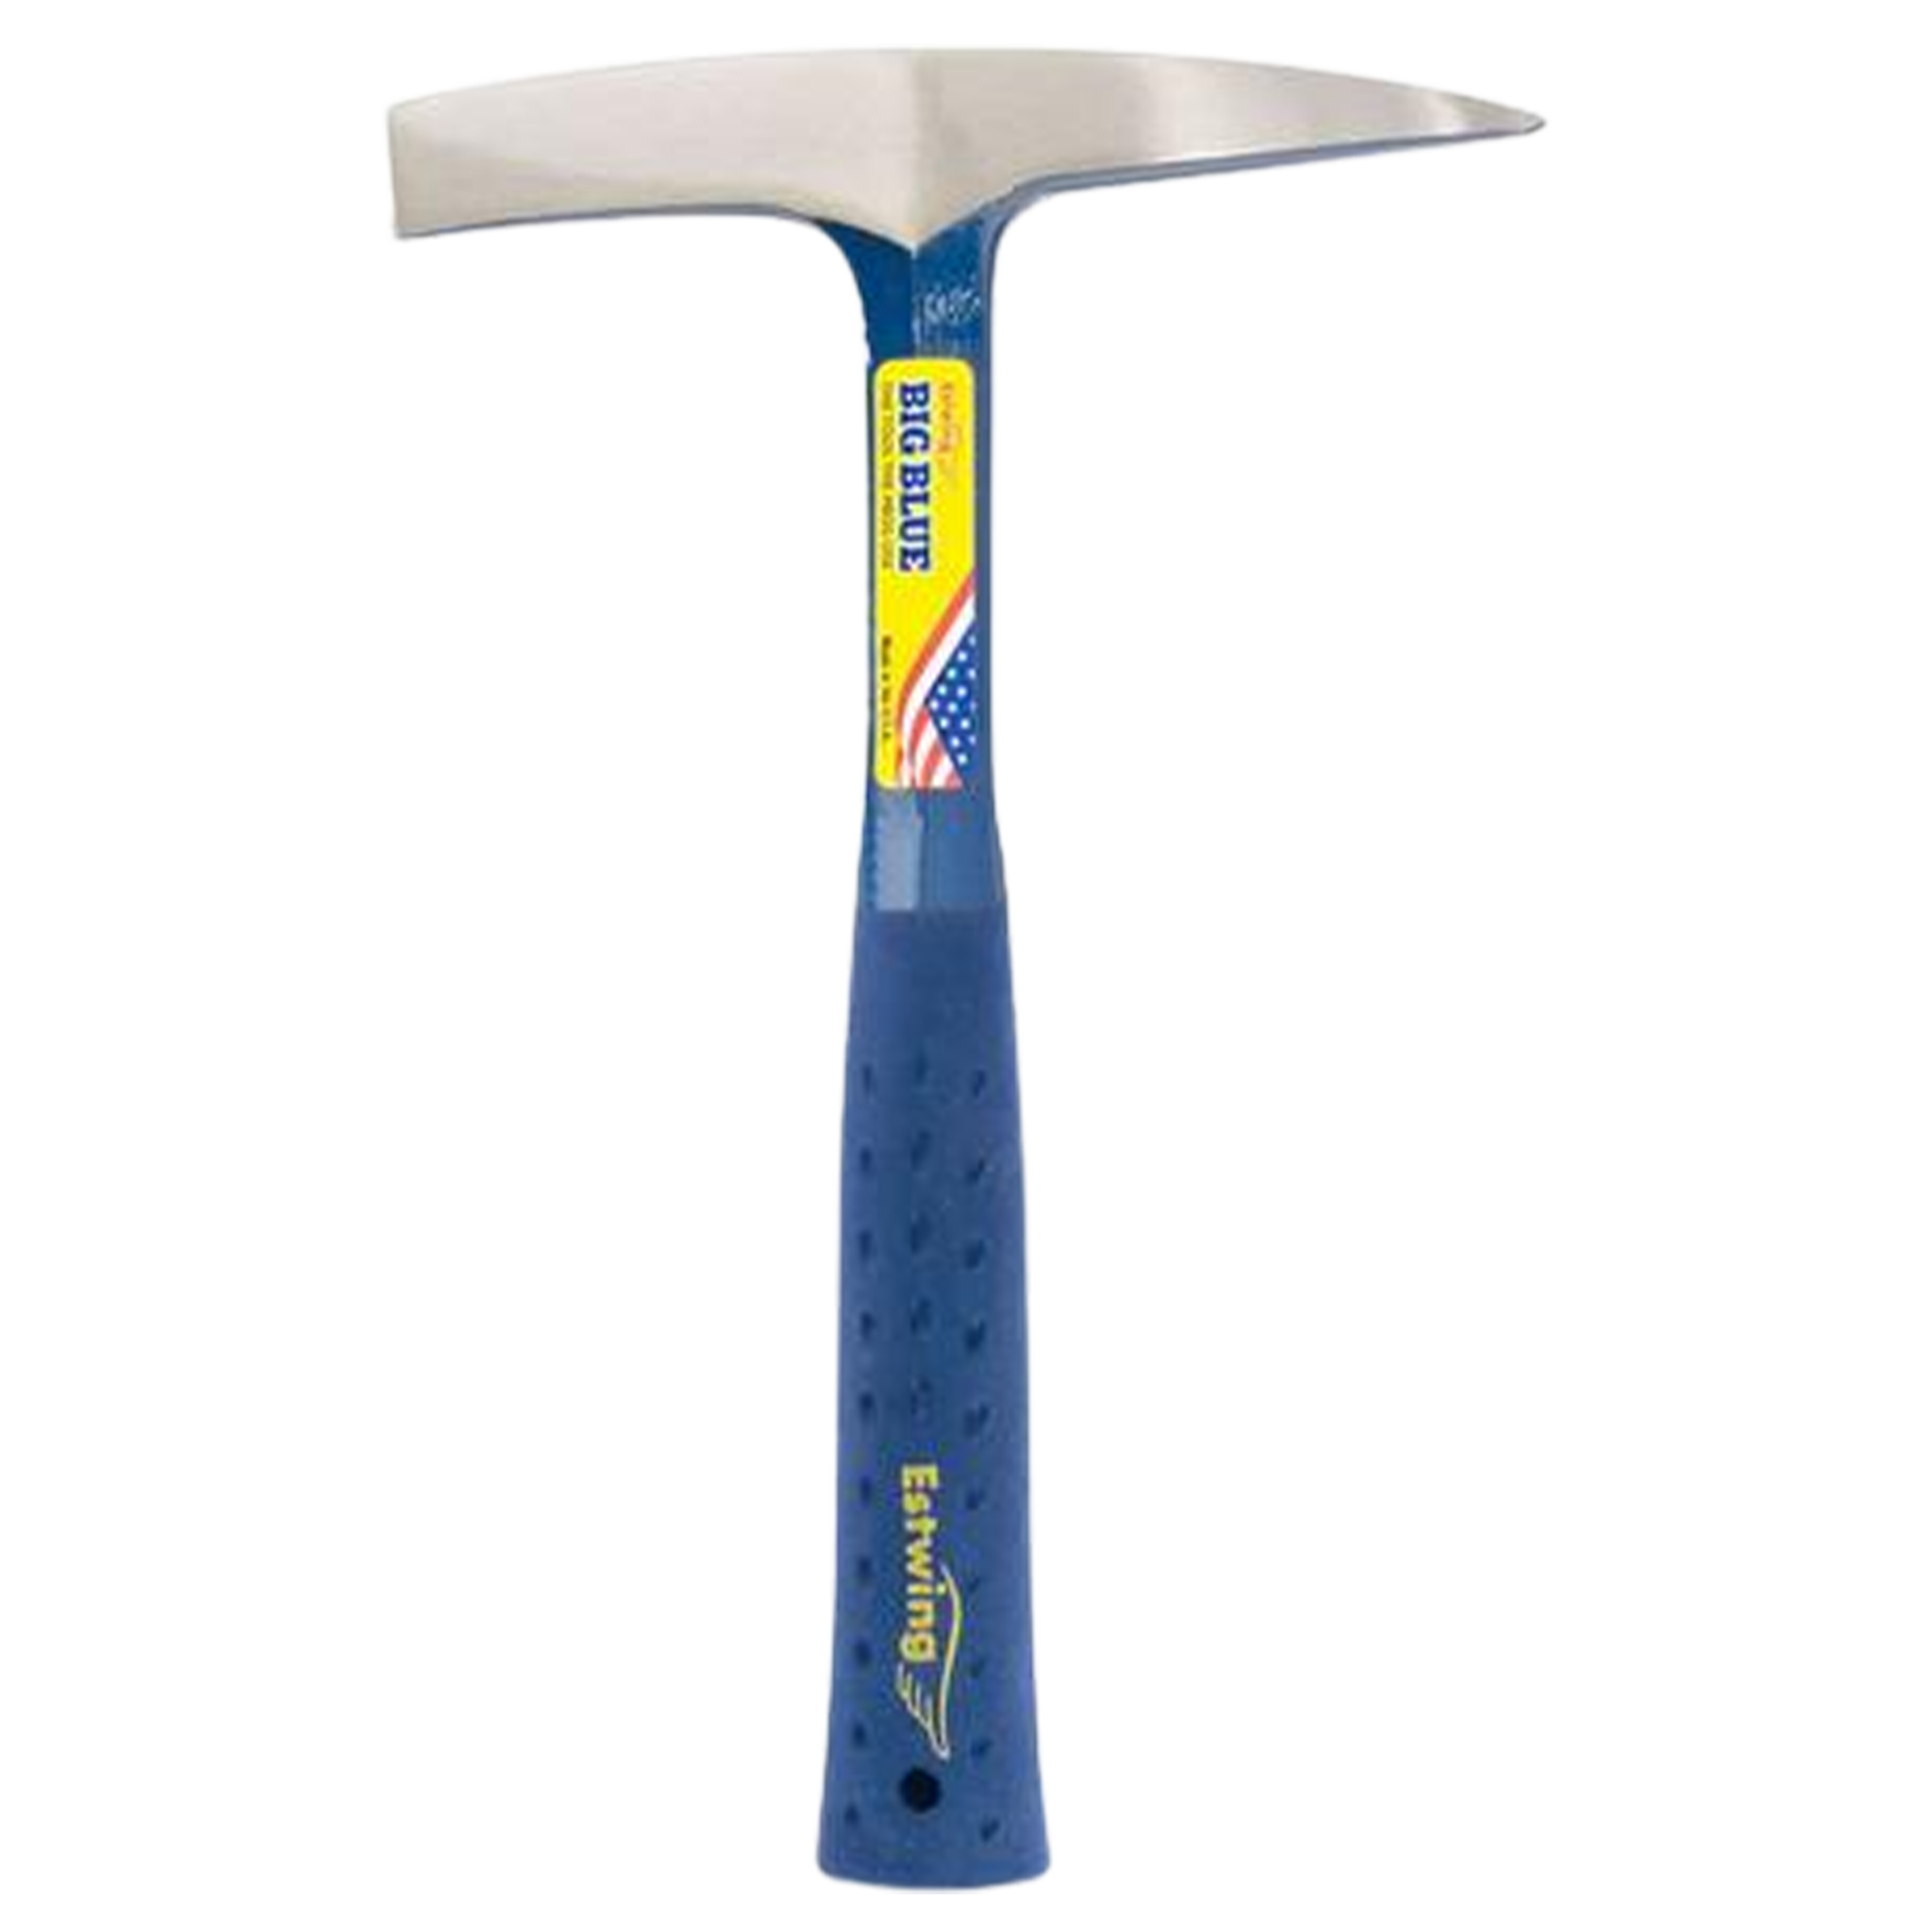 Estwing Chipping Hammer